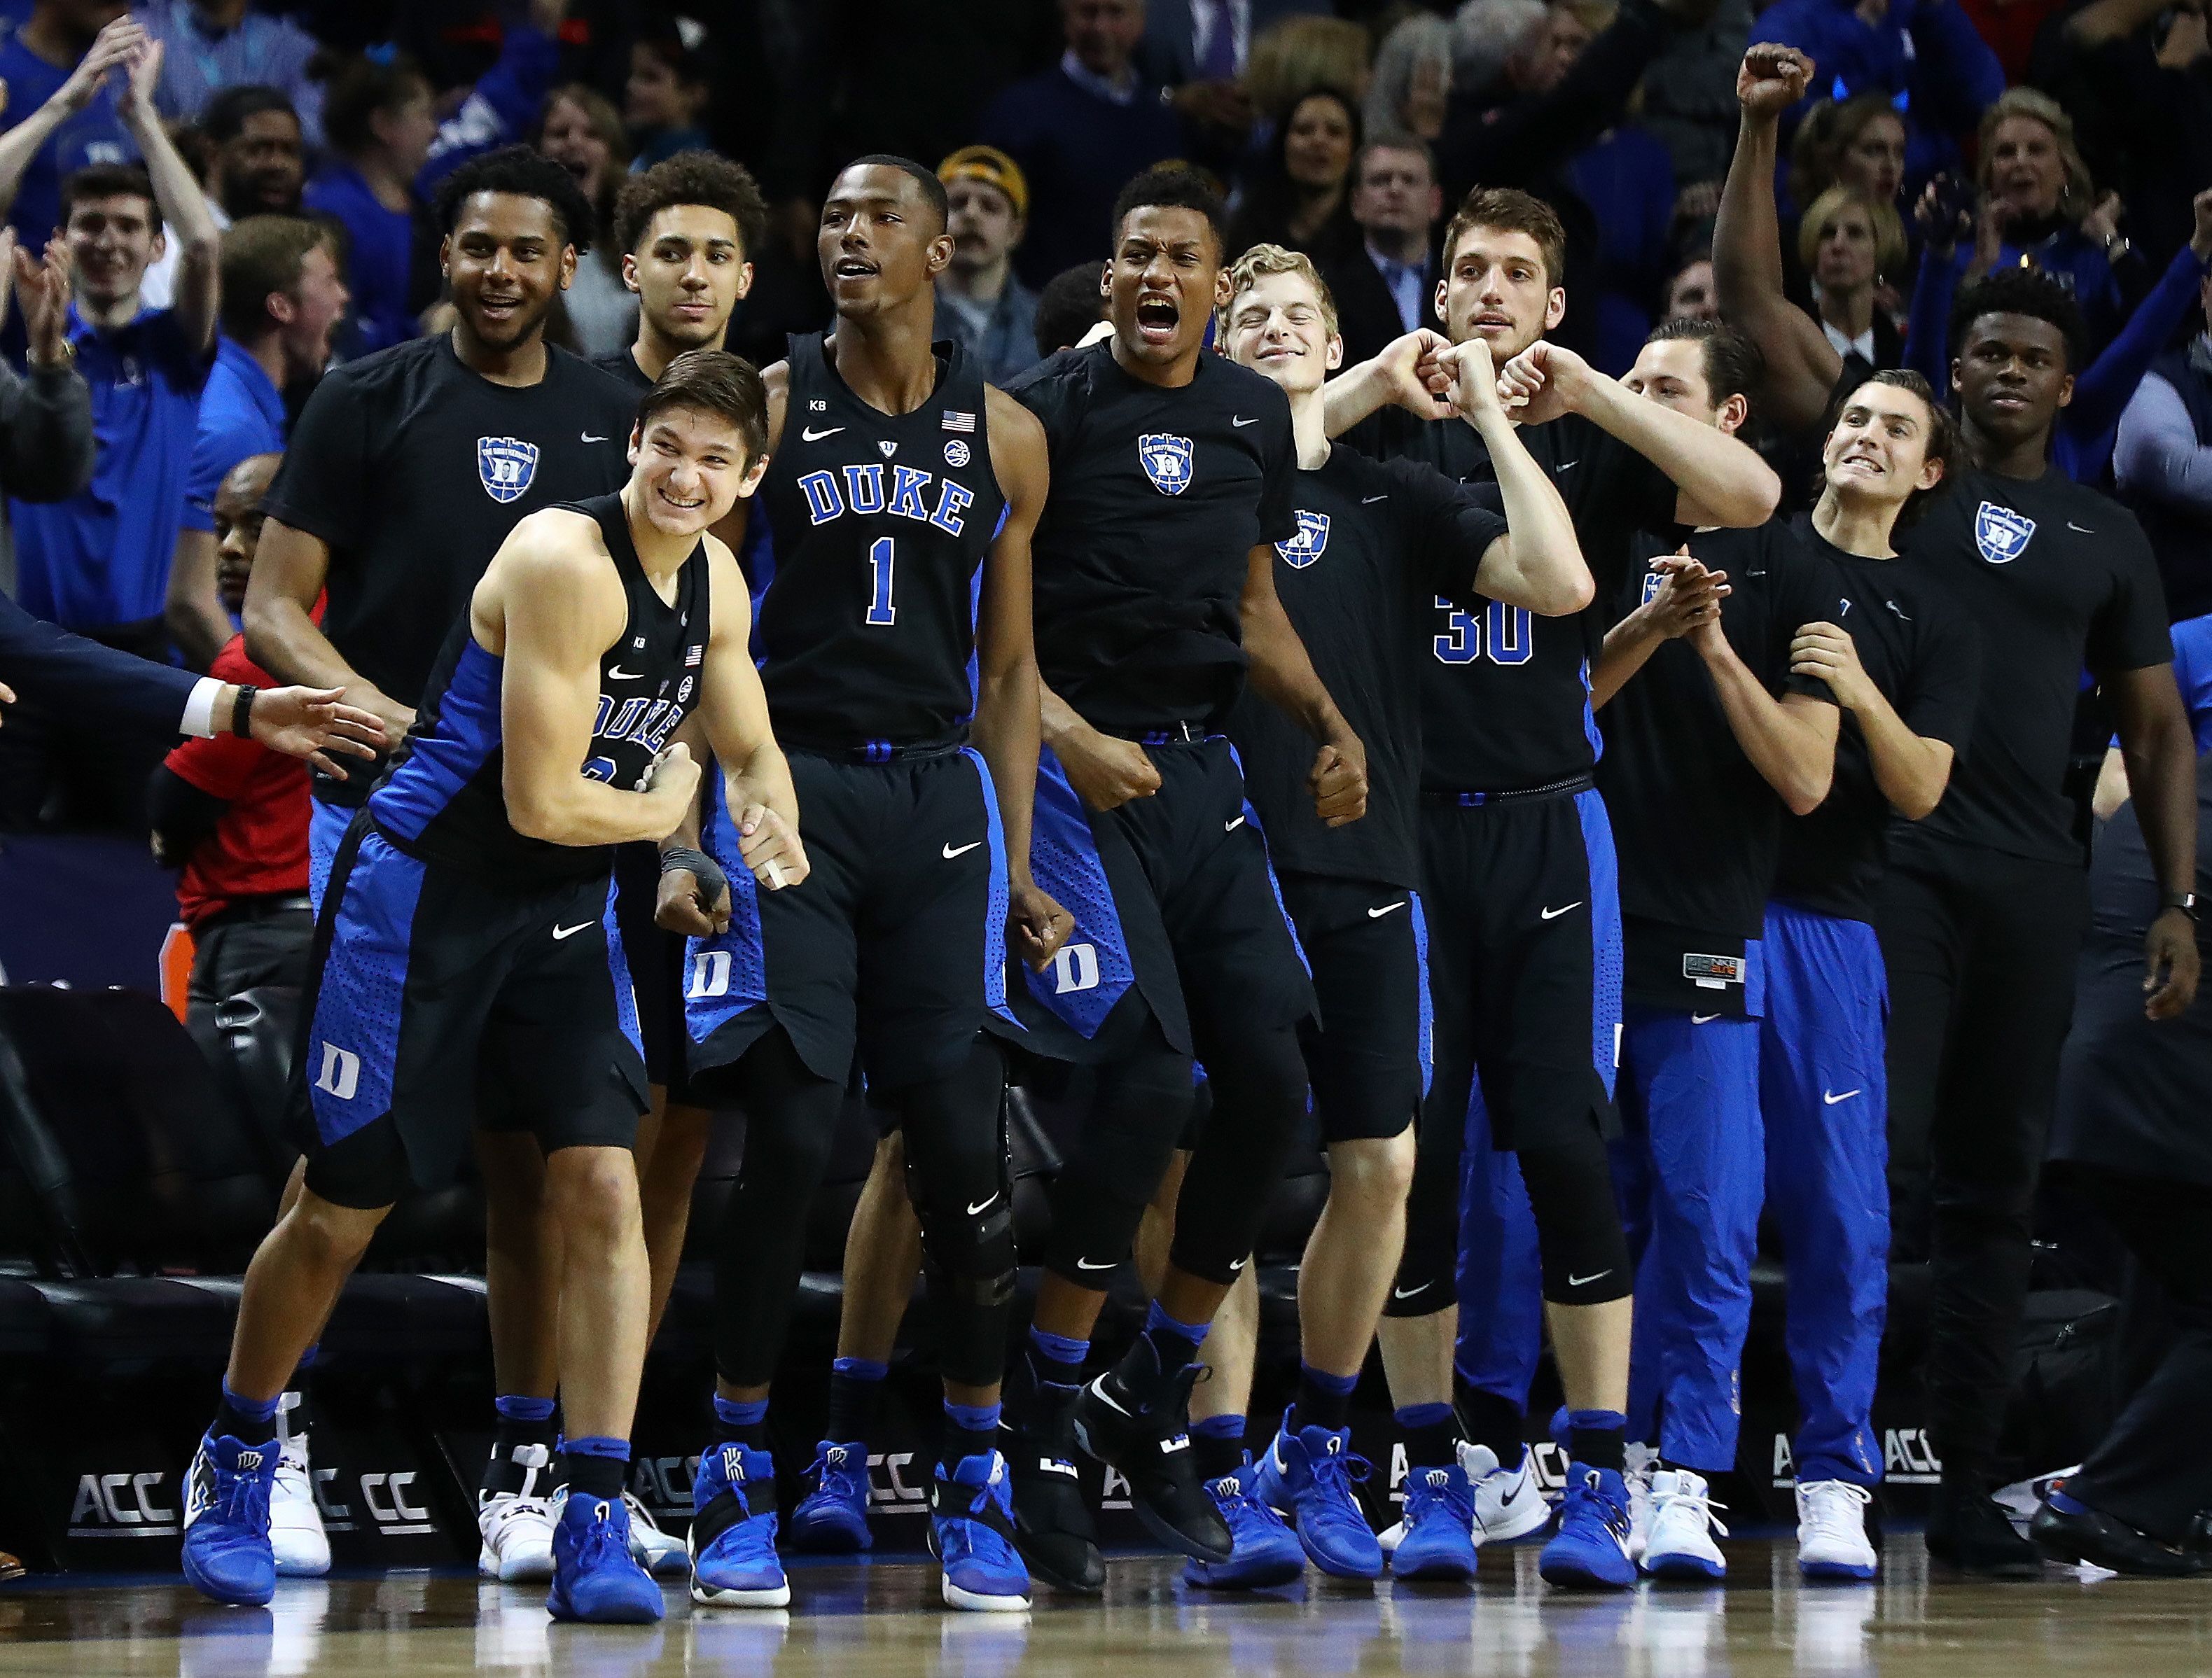 Duke MBB: Looking Back on 2017 and Forward to 2018